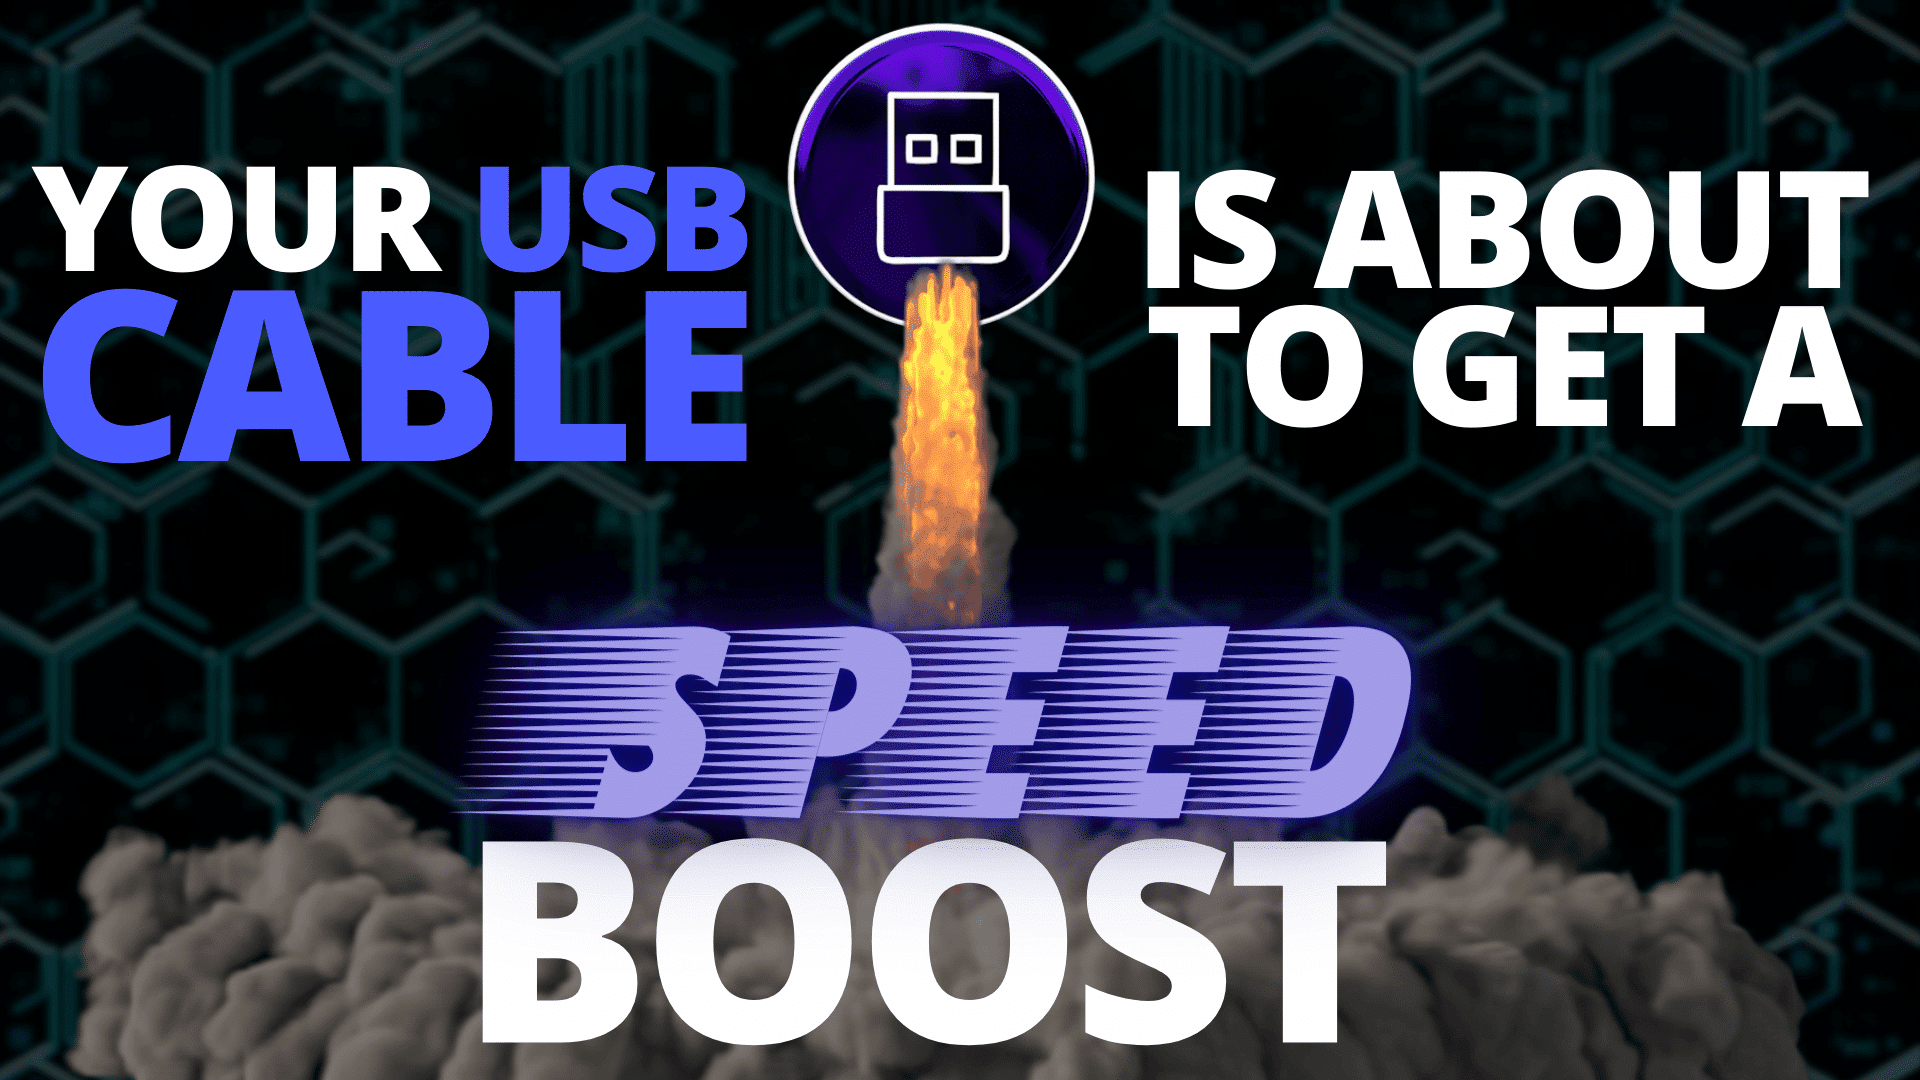 the words, your USB cable is about to get a speed boost